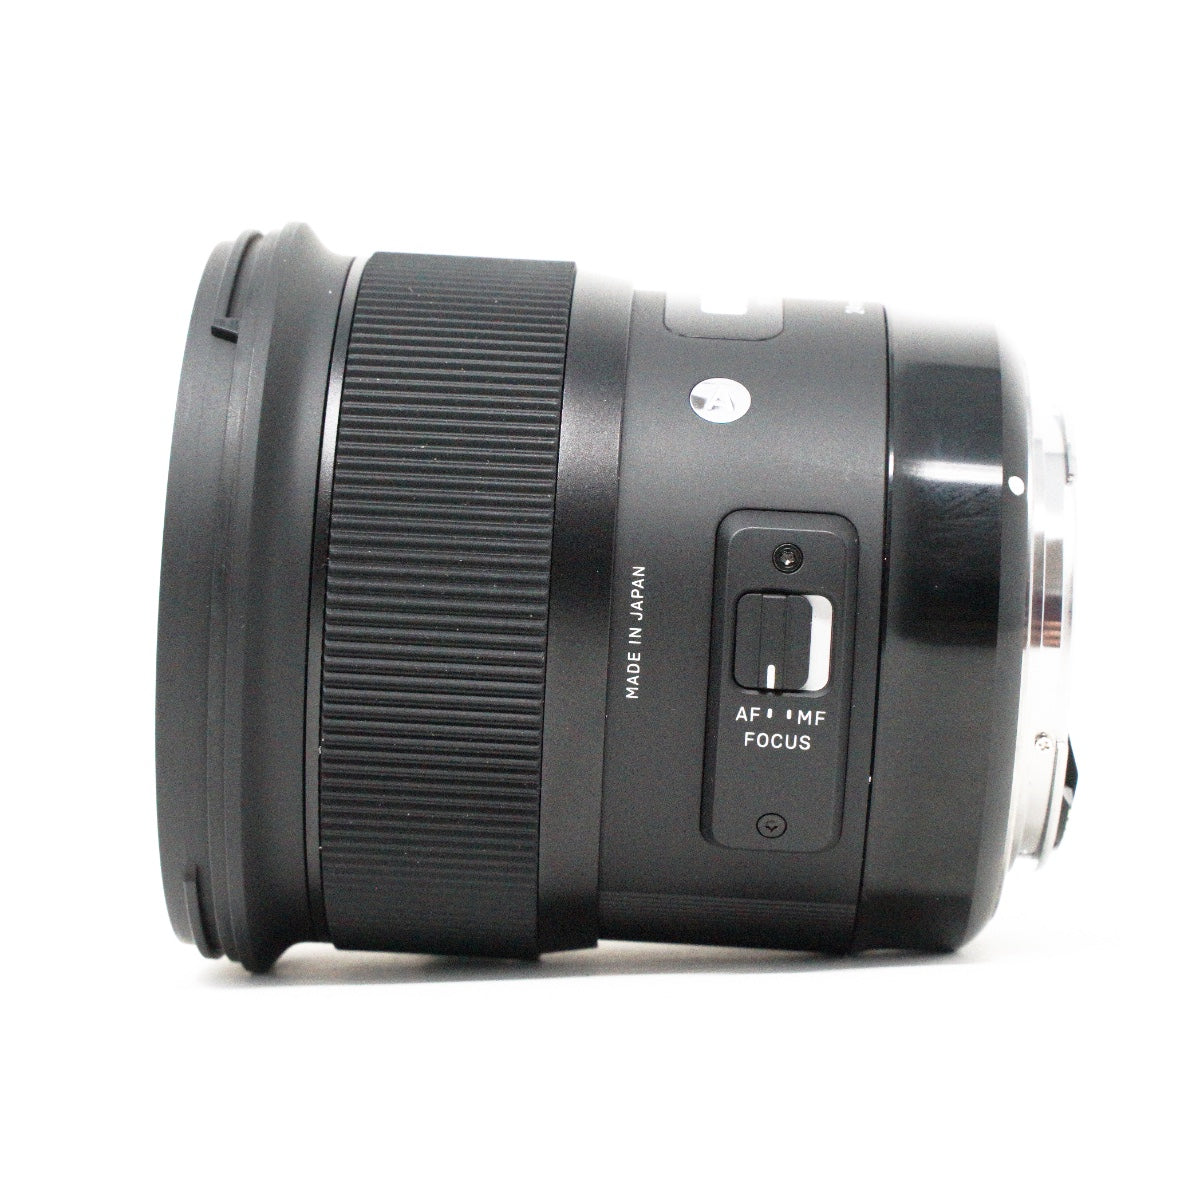 USED Sigma 24mm F1.4 DG HSM A Series Canon fit Lens